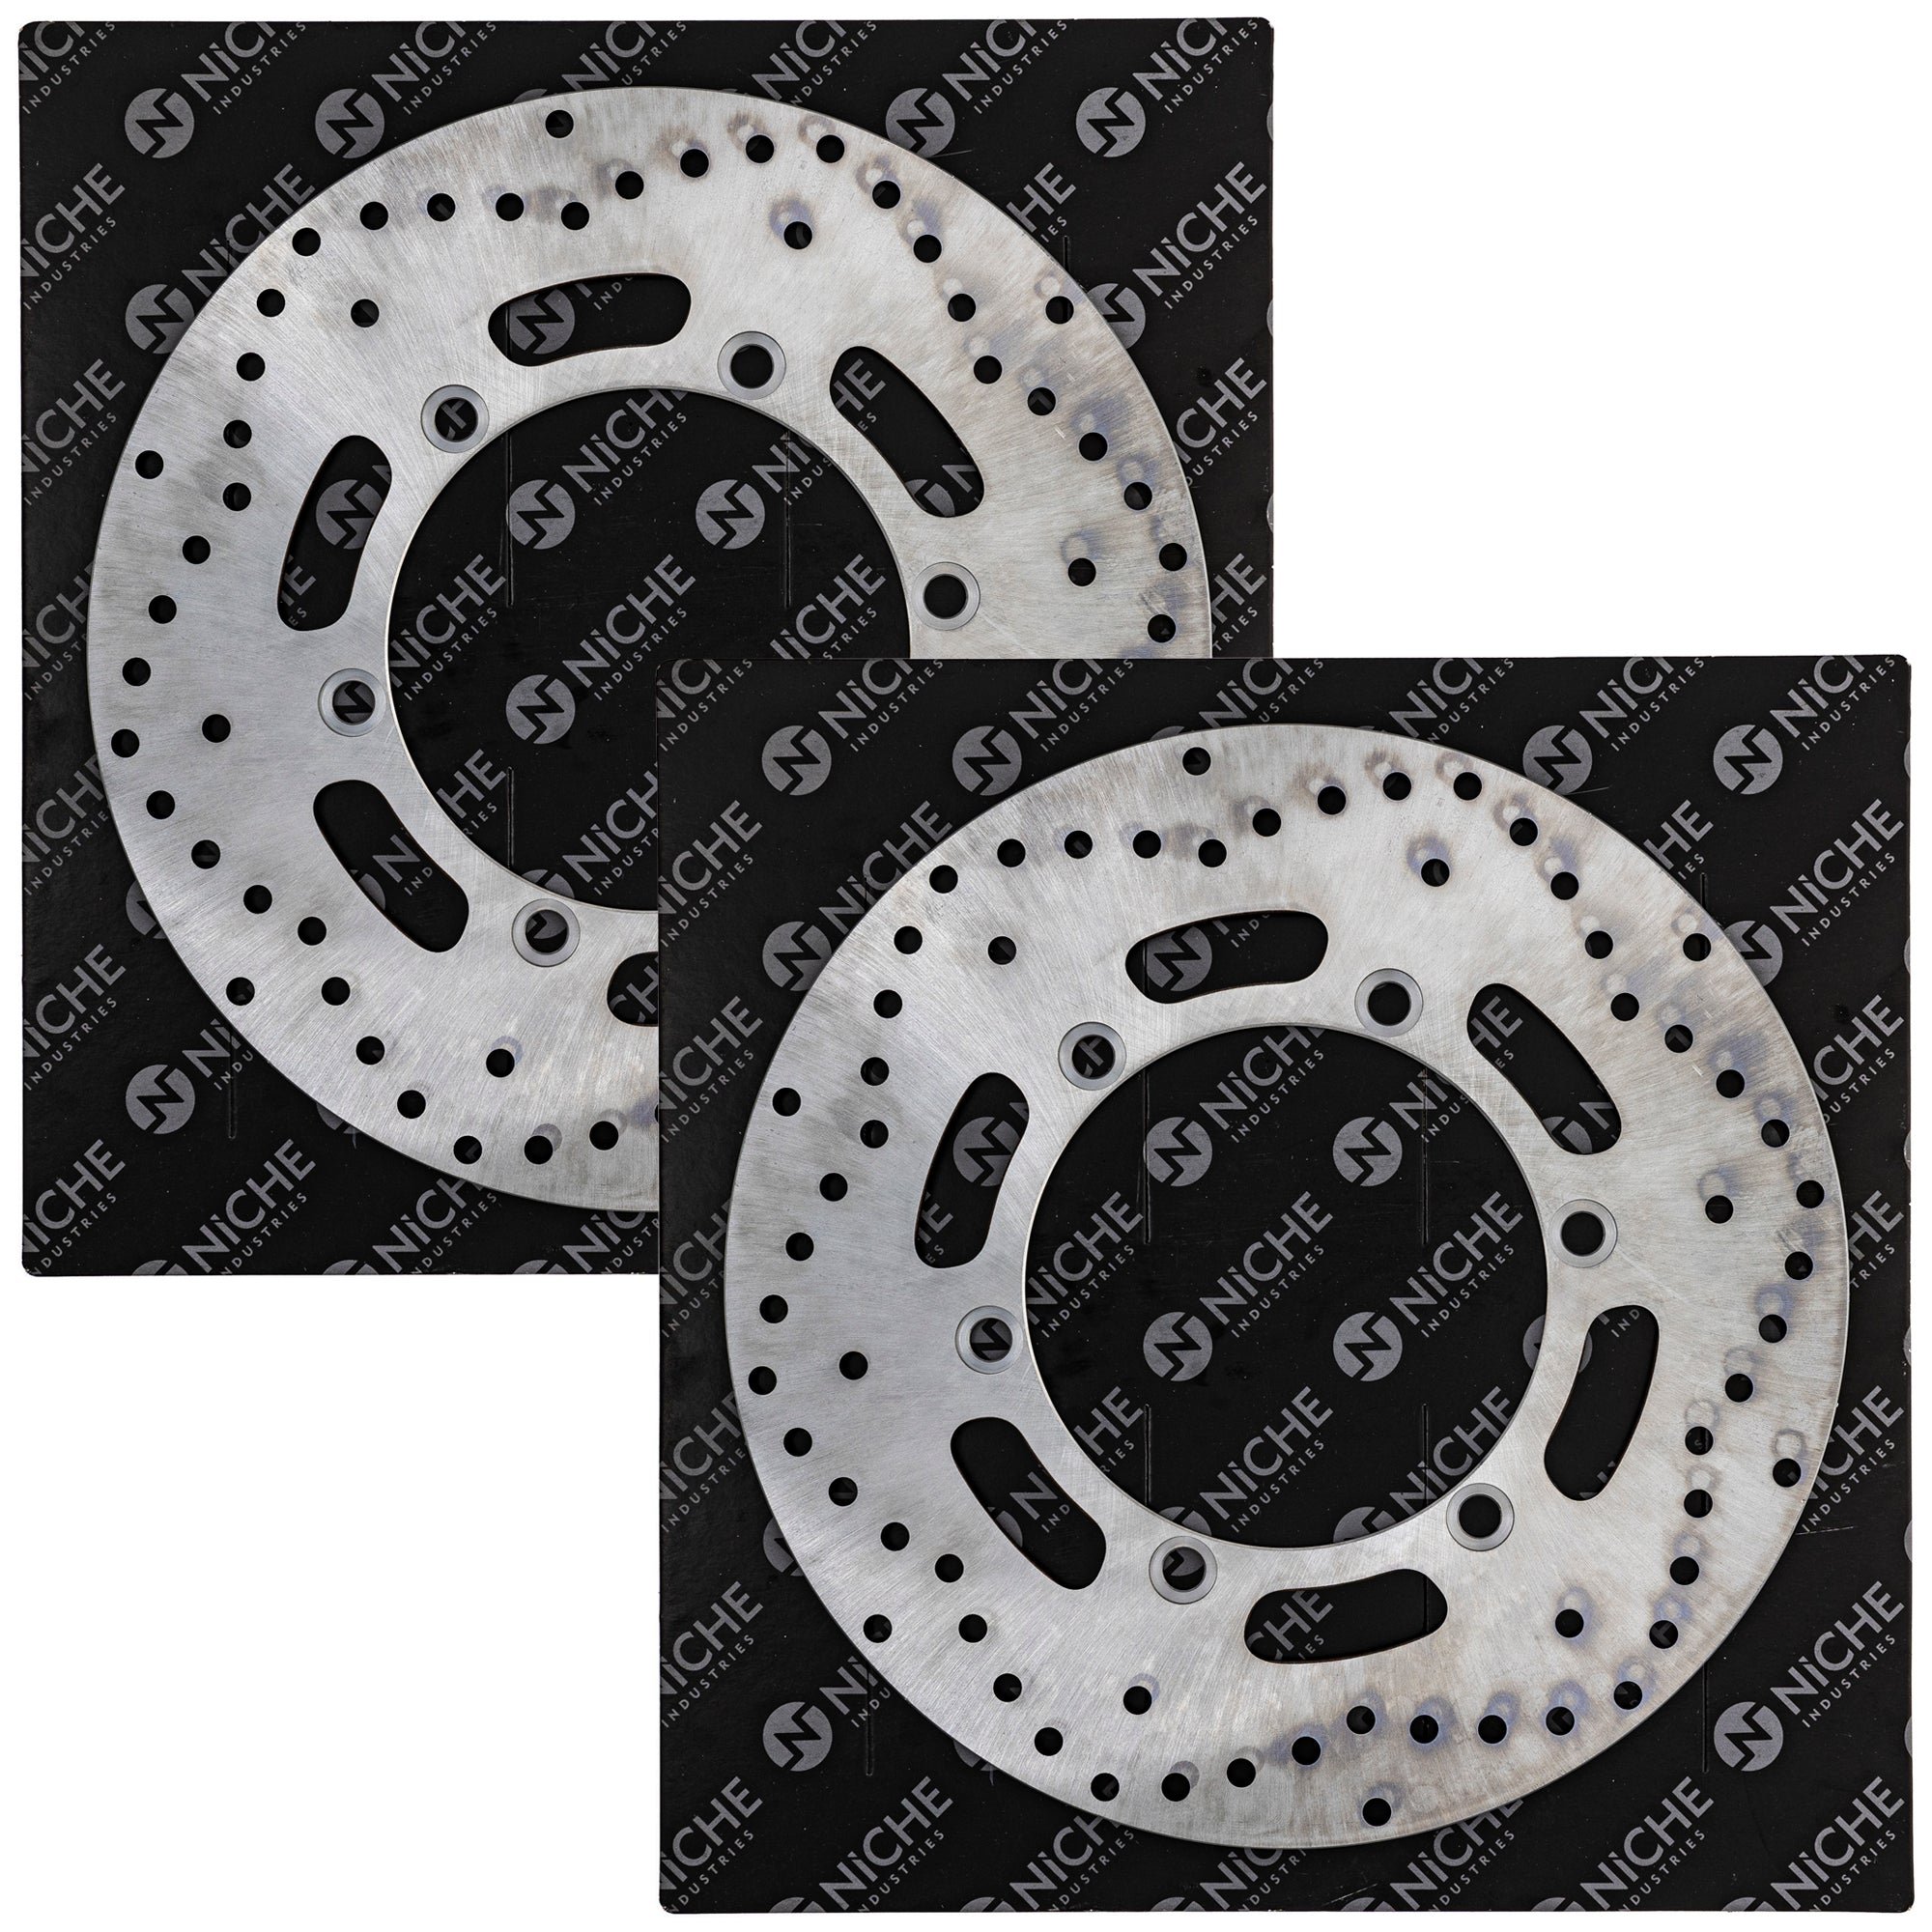 NICHE 519-CRT2342R Front Brake Rotor 2-Pack for zOTHER Ninja GPz750